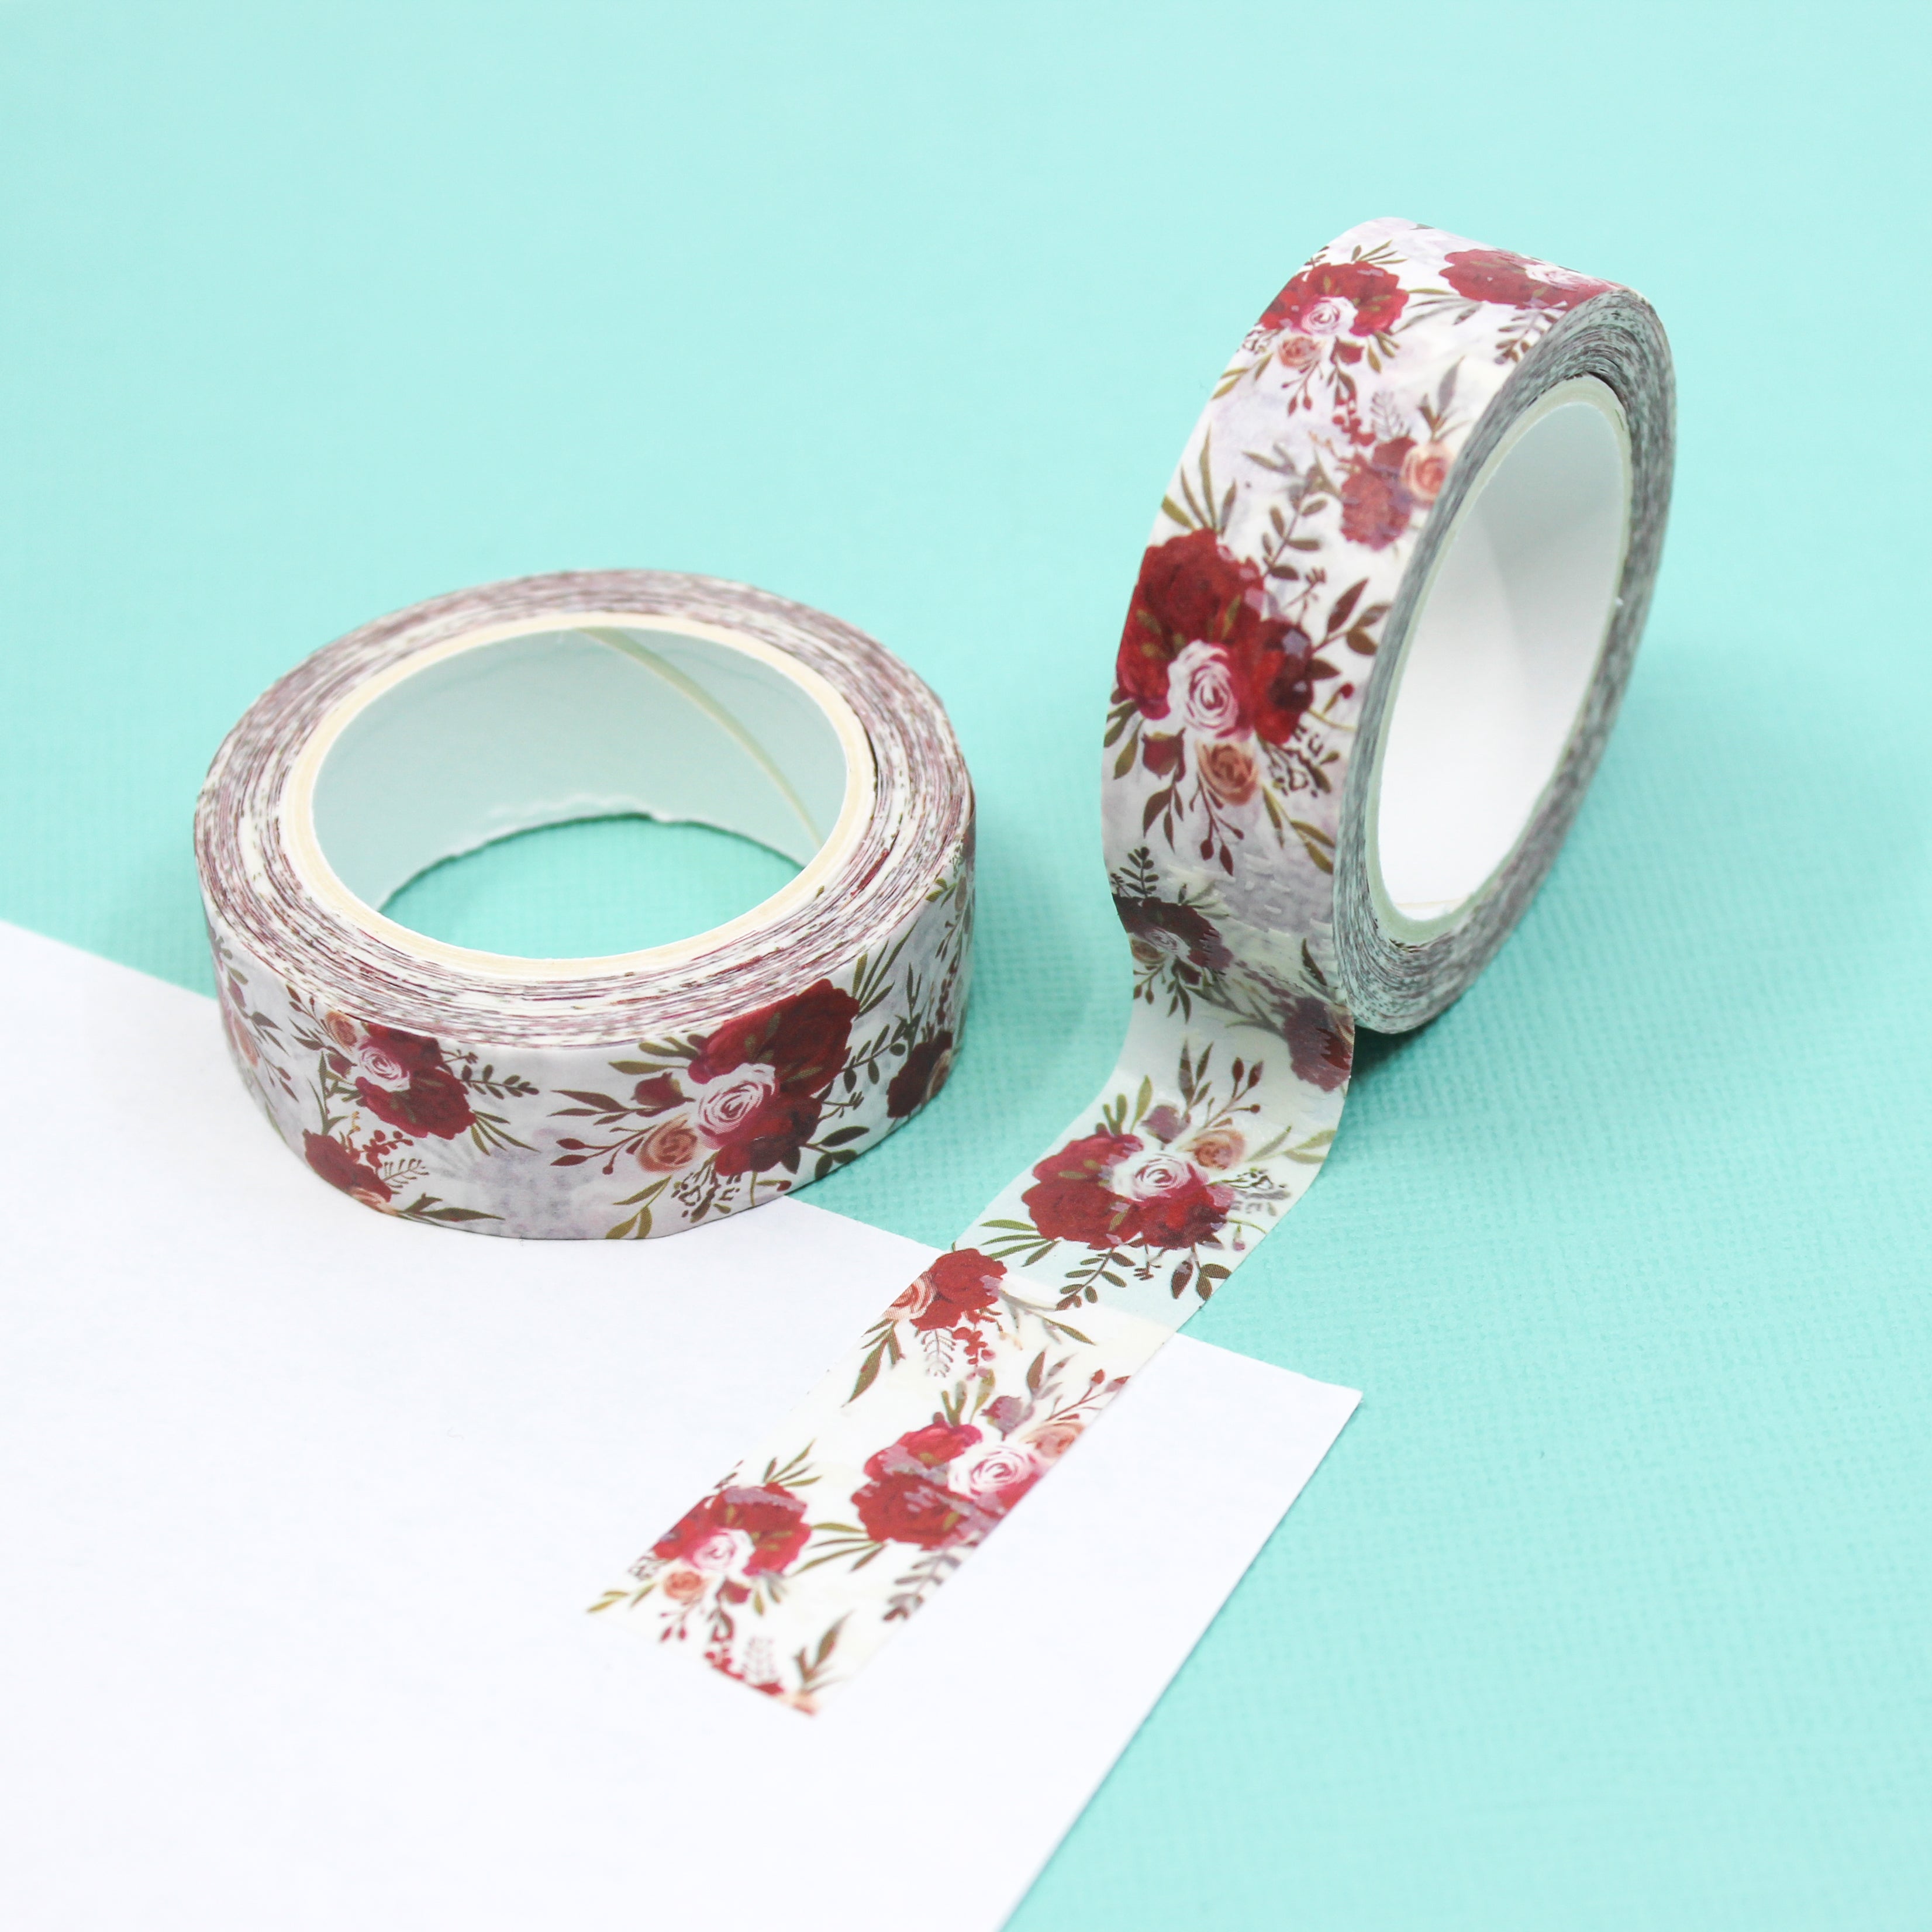 Enhance your crafts with our Vivid Floral Roses Washi Tape, featuring vibrant and elegant rose motifs. Ideal for adding a burst of colorful and sophisticated beauty to your projects. This tape is sold at BBB Supplies Craft Shop.